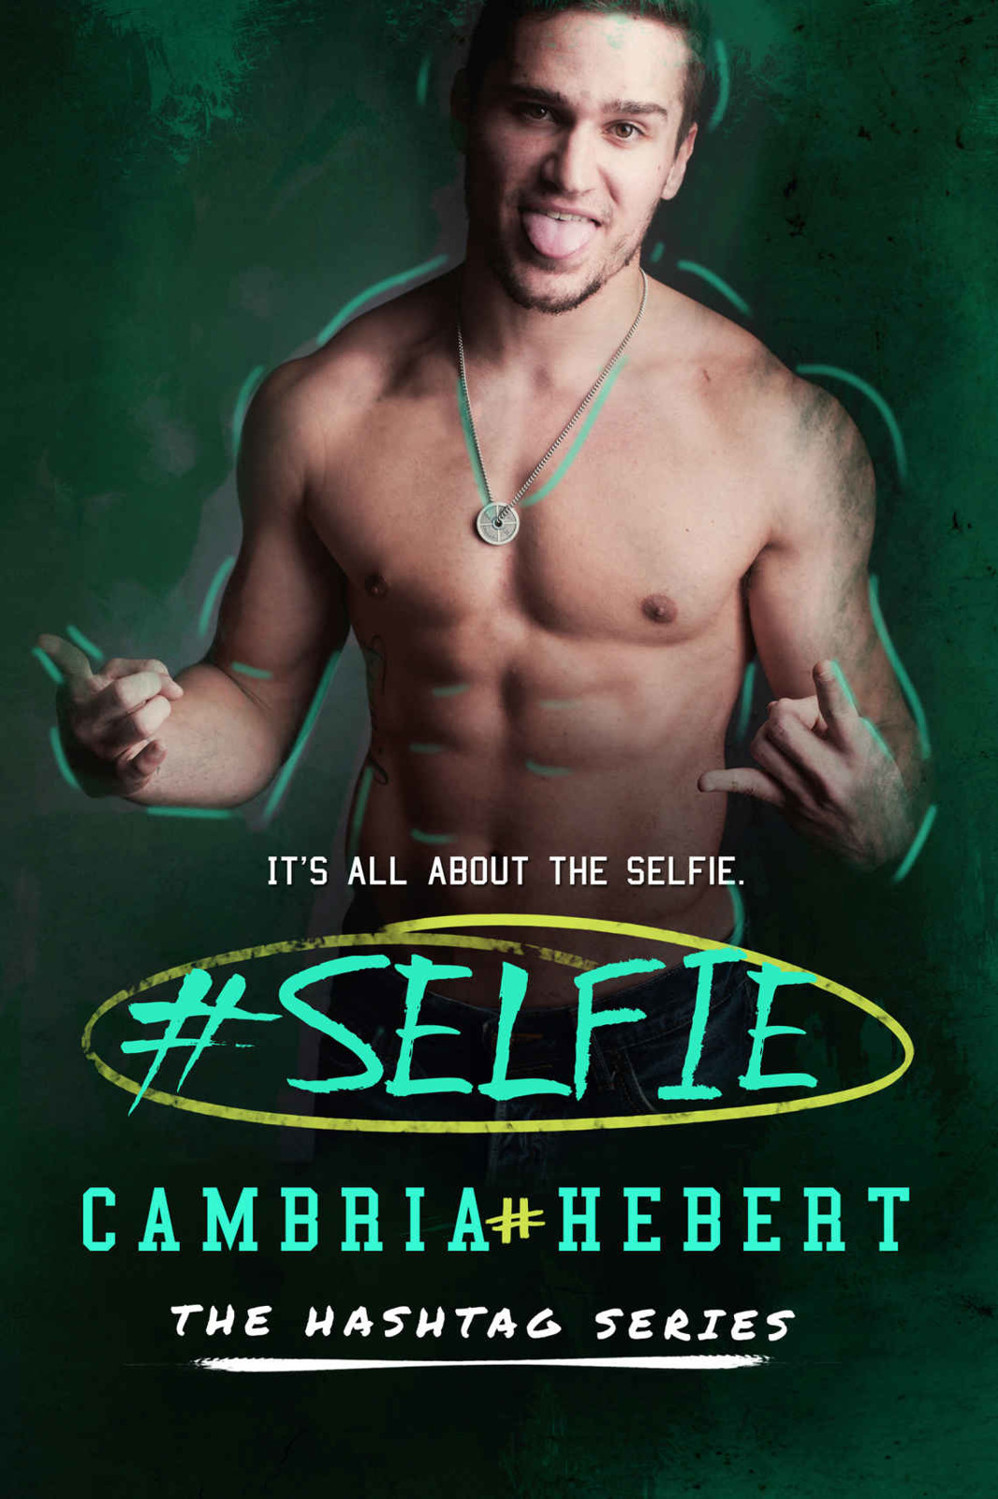 #Selfie (Hashtag Series Book 4) by Cambria Hebert